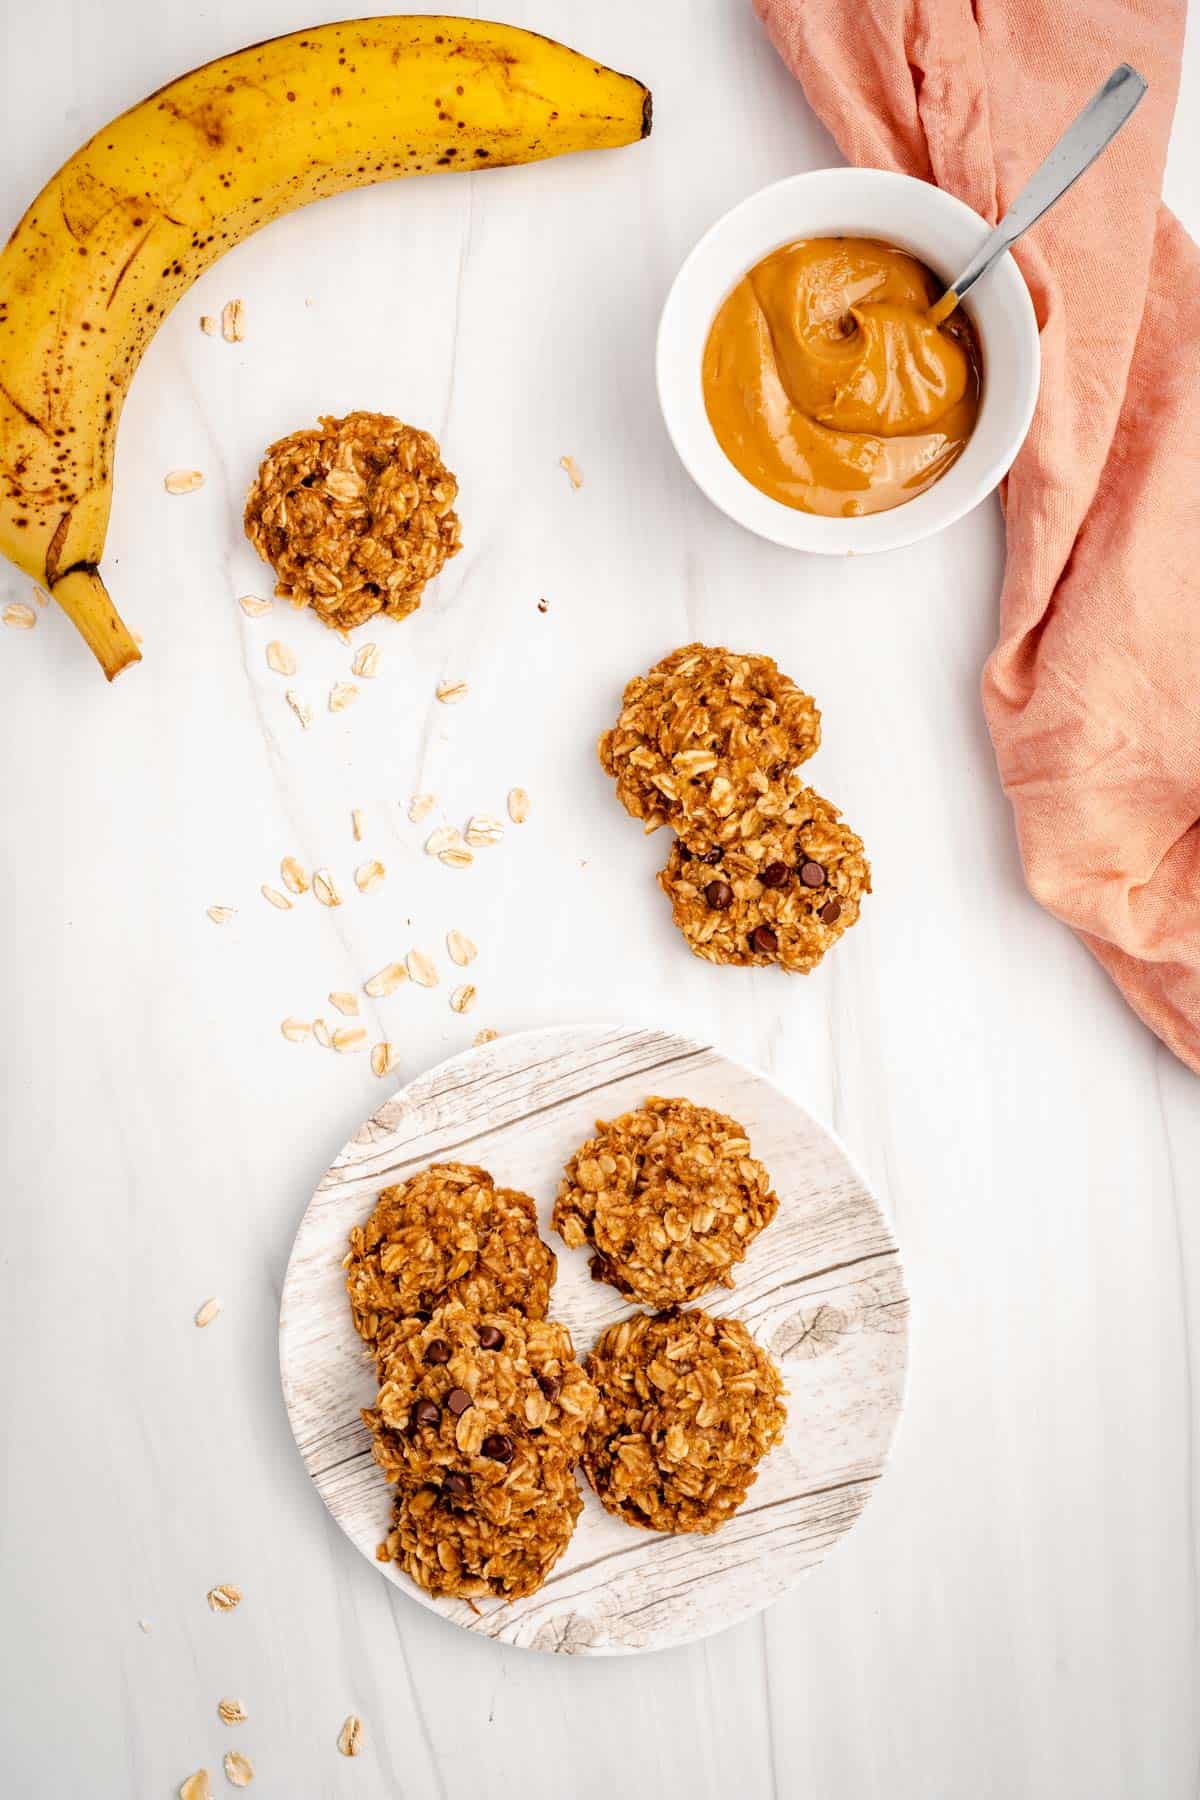 cookies on plate with 3 on counter plus a ripe banana and bowl of peanut butter with spoon.